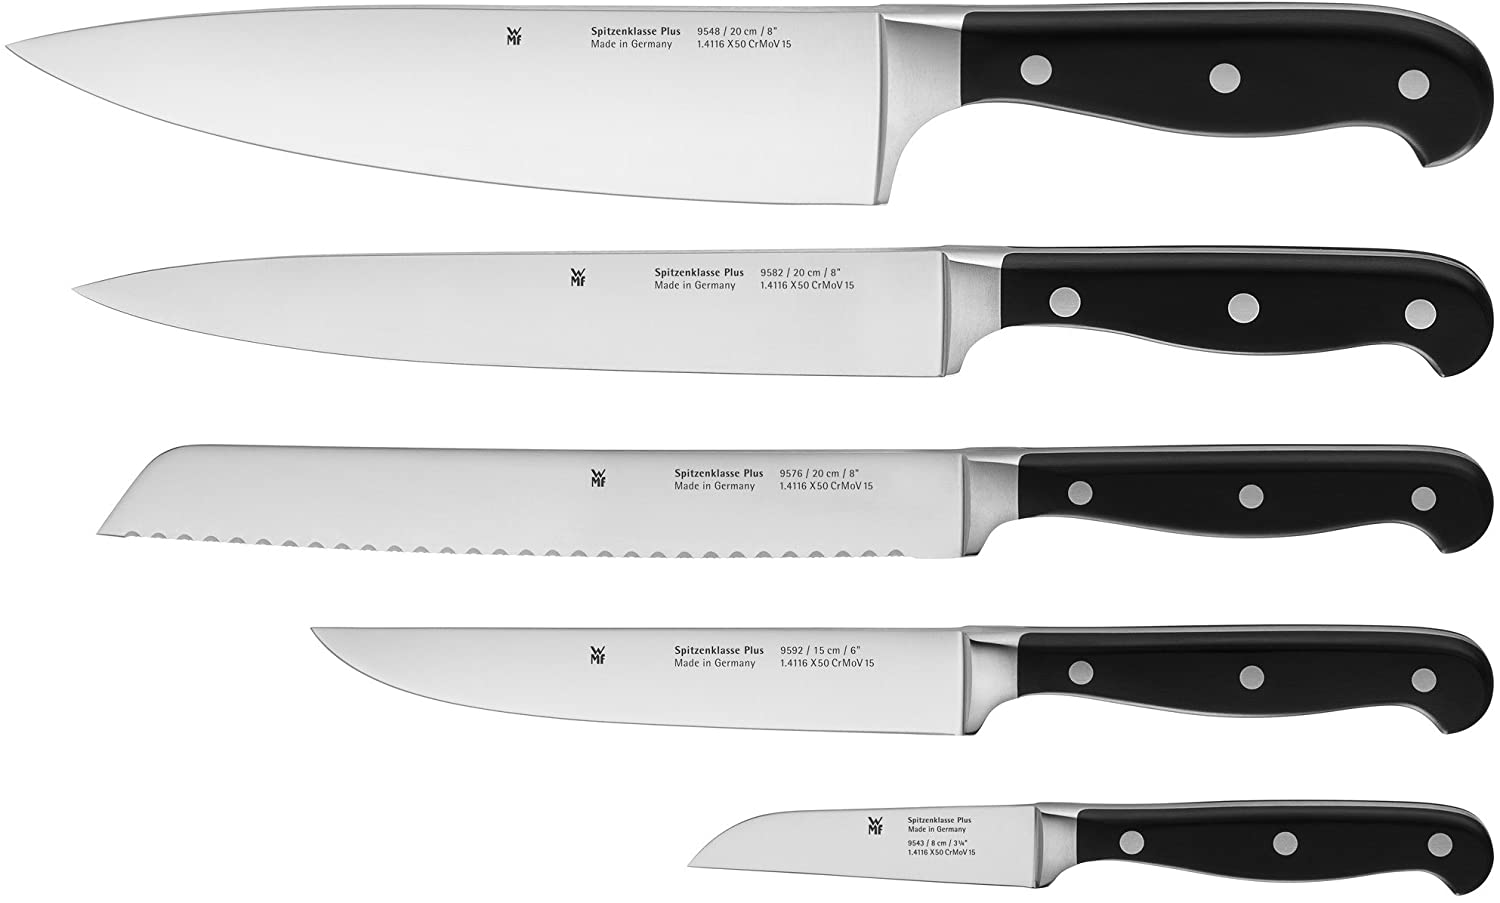 WMF Knife Sets 5 Pieces Spitzenklasse Plus 5 Knives, Kitchen Knives Forged Performance Cut Chef\'s Knife